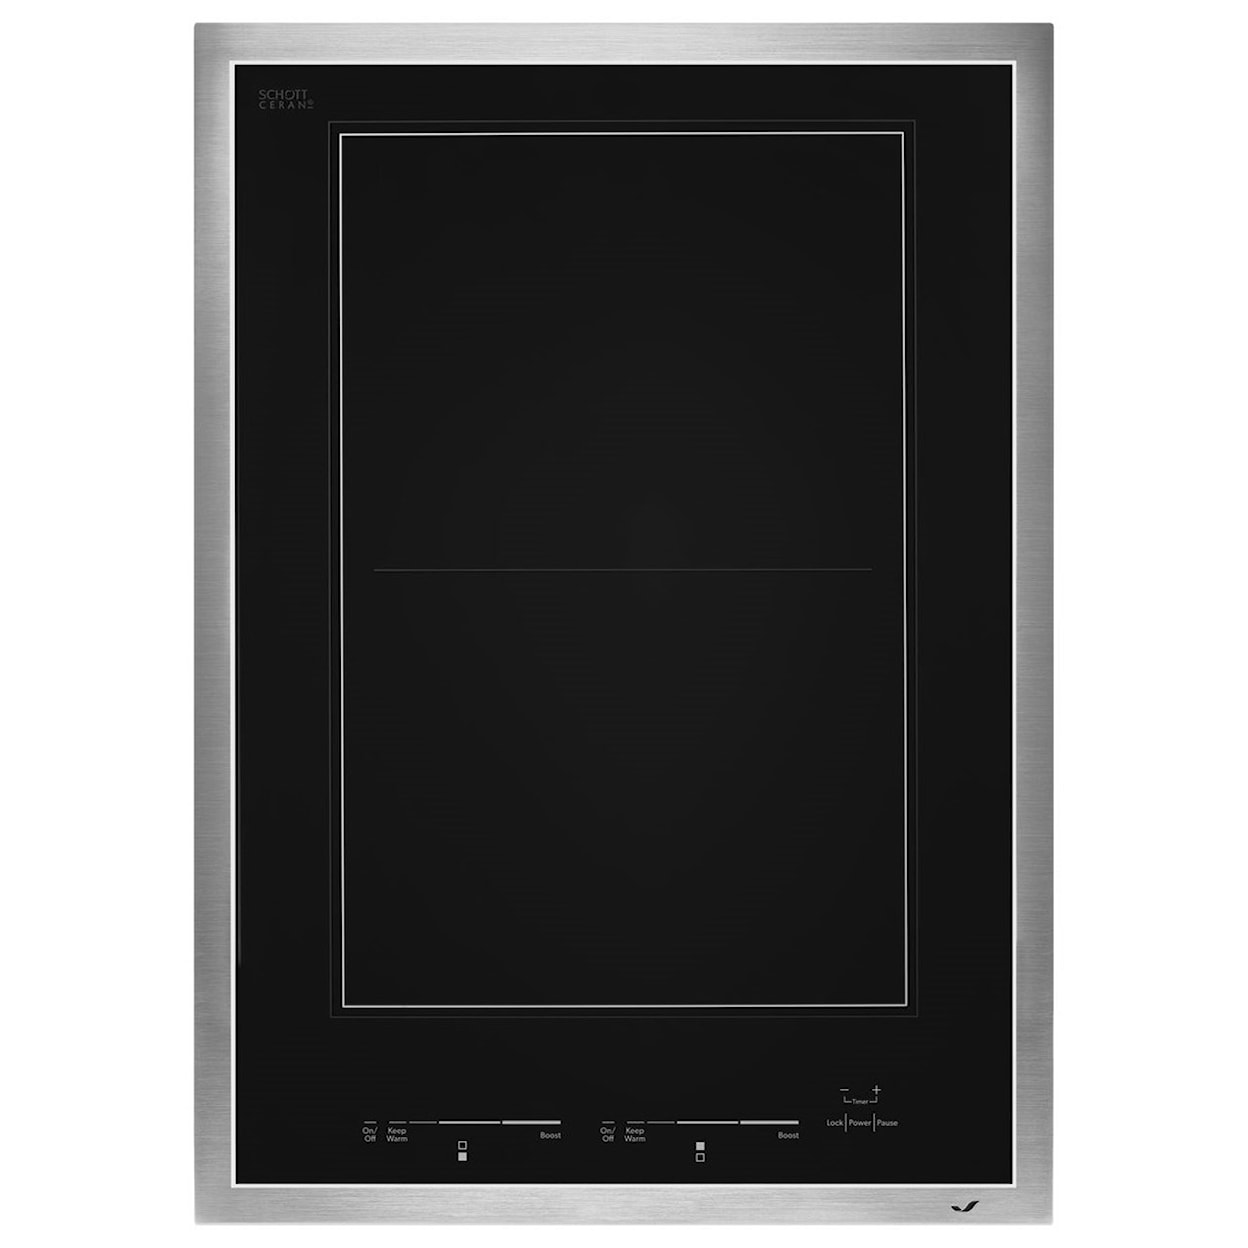 Jenn-Air Cooktops - Electric 15" Induction Cooktop